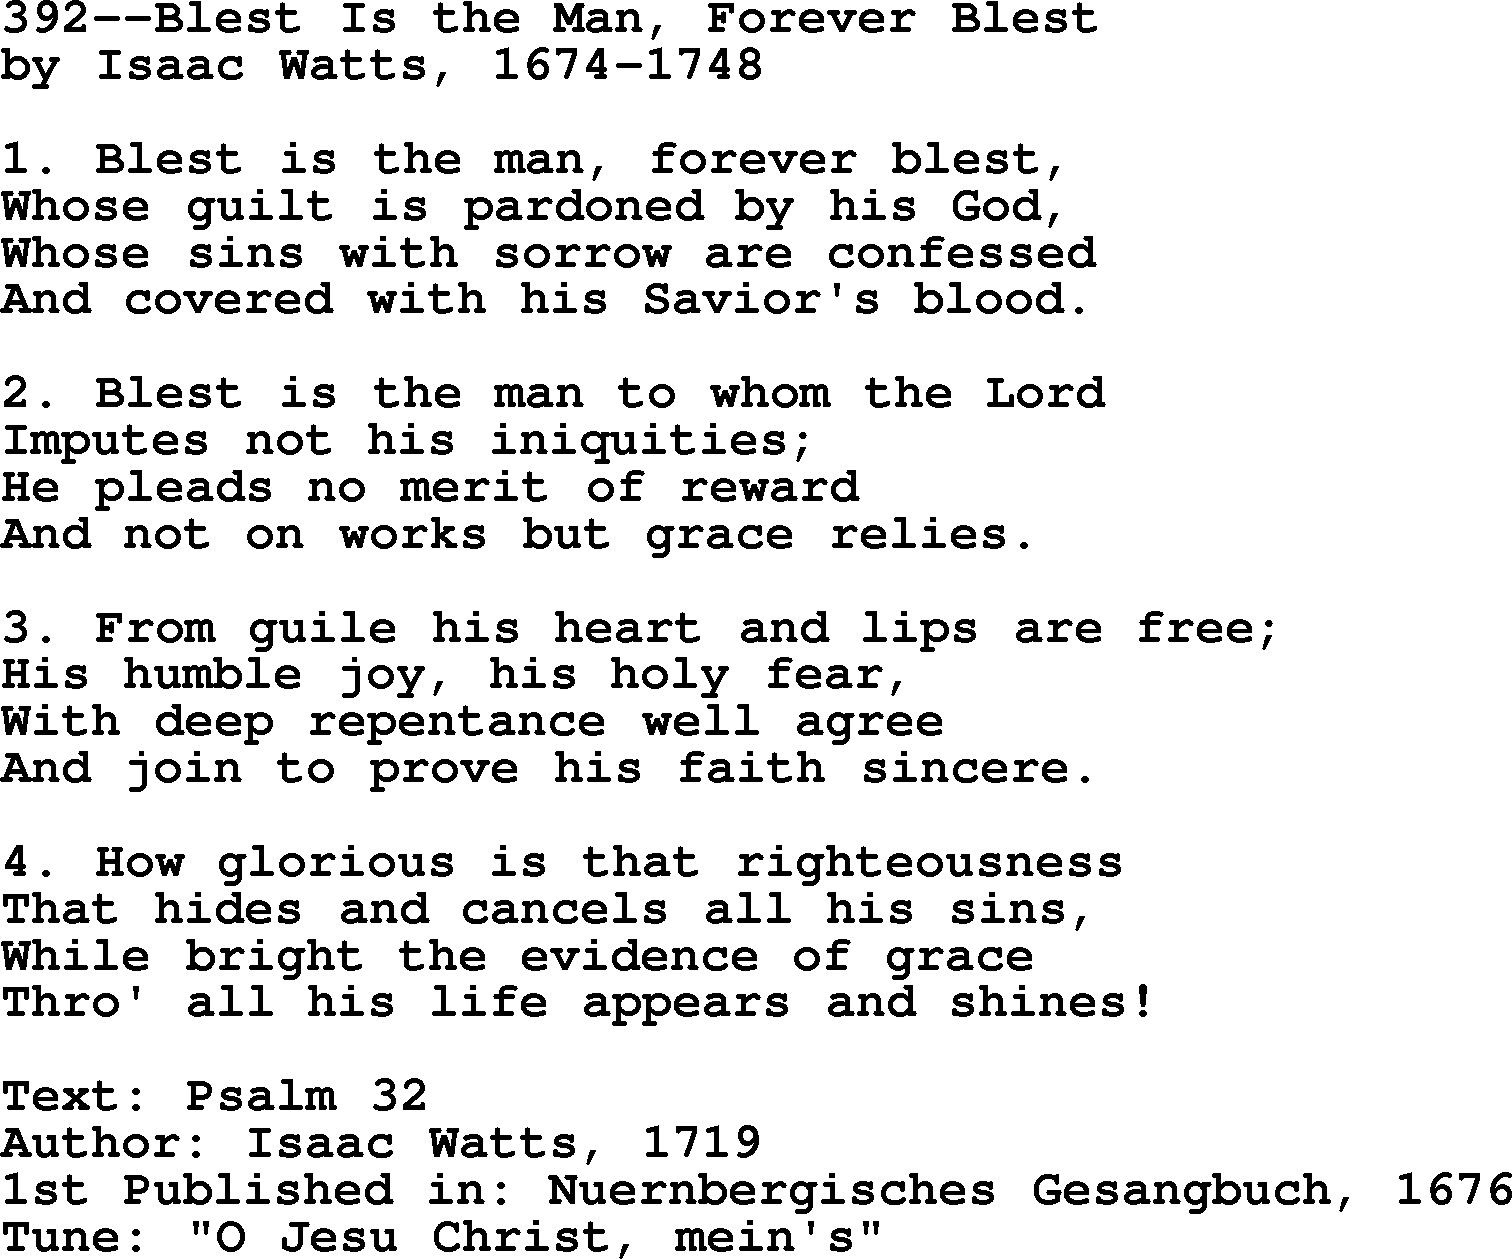 Lutheran Hymn: 392--Blest Is the Man, Forever Blest.txt lyrics with PDF